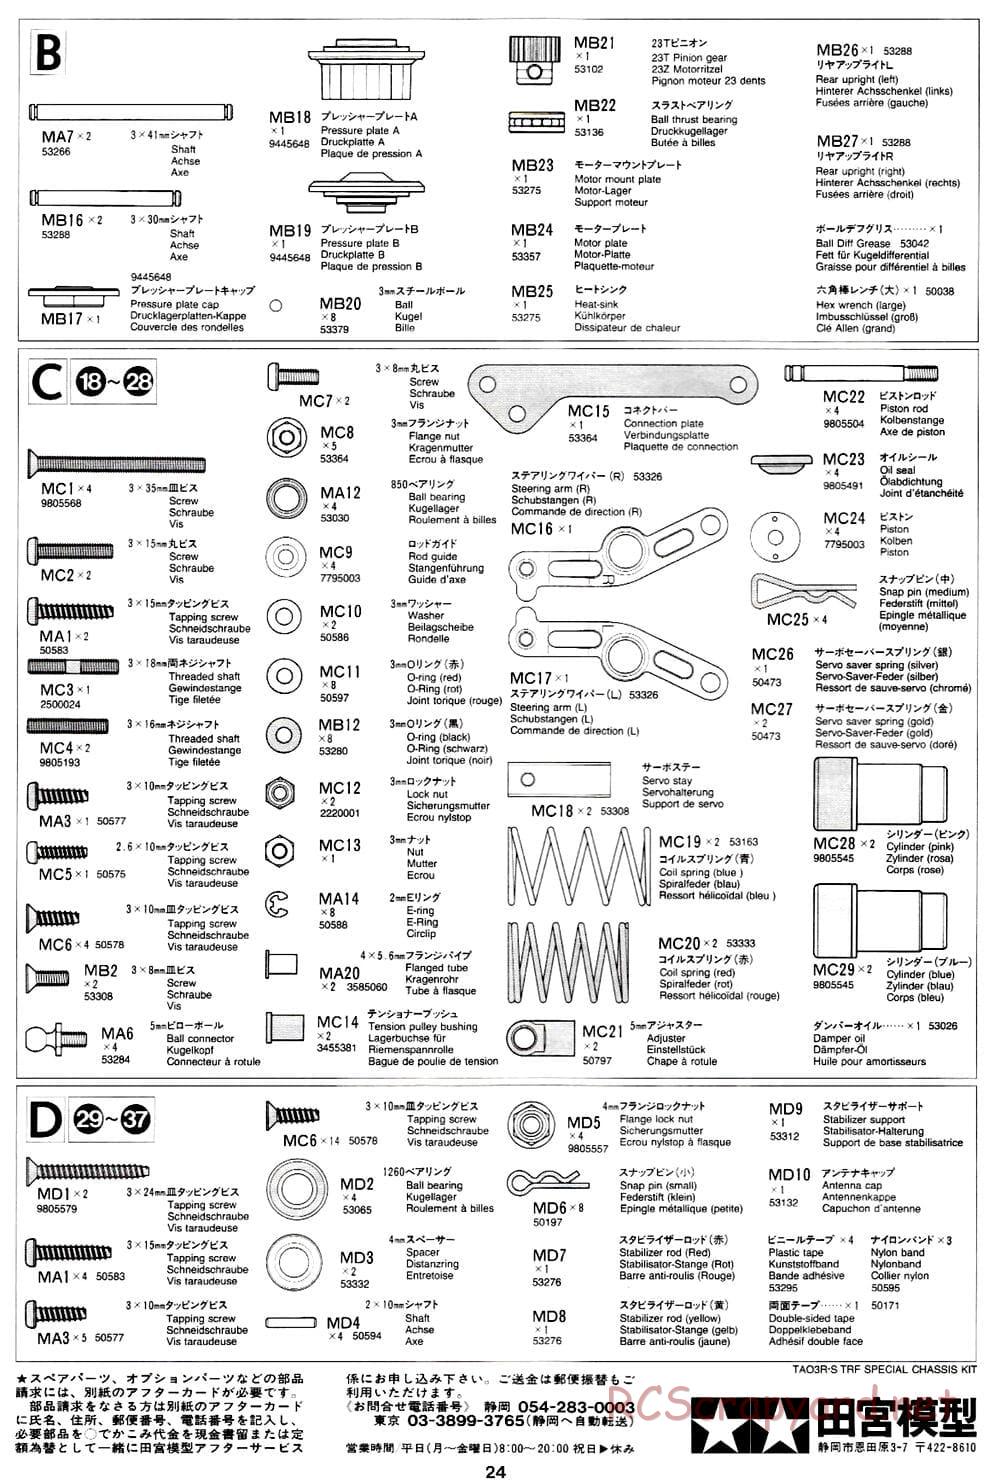 Tamiya - TA-03RS TRF Special Chassis - Manual - Page 24